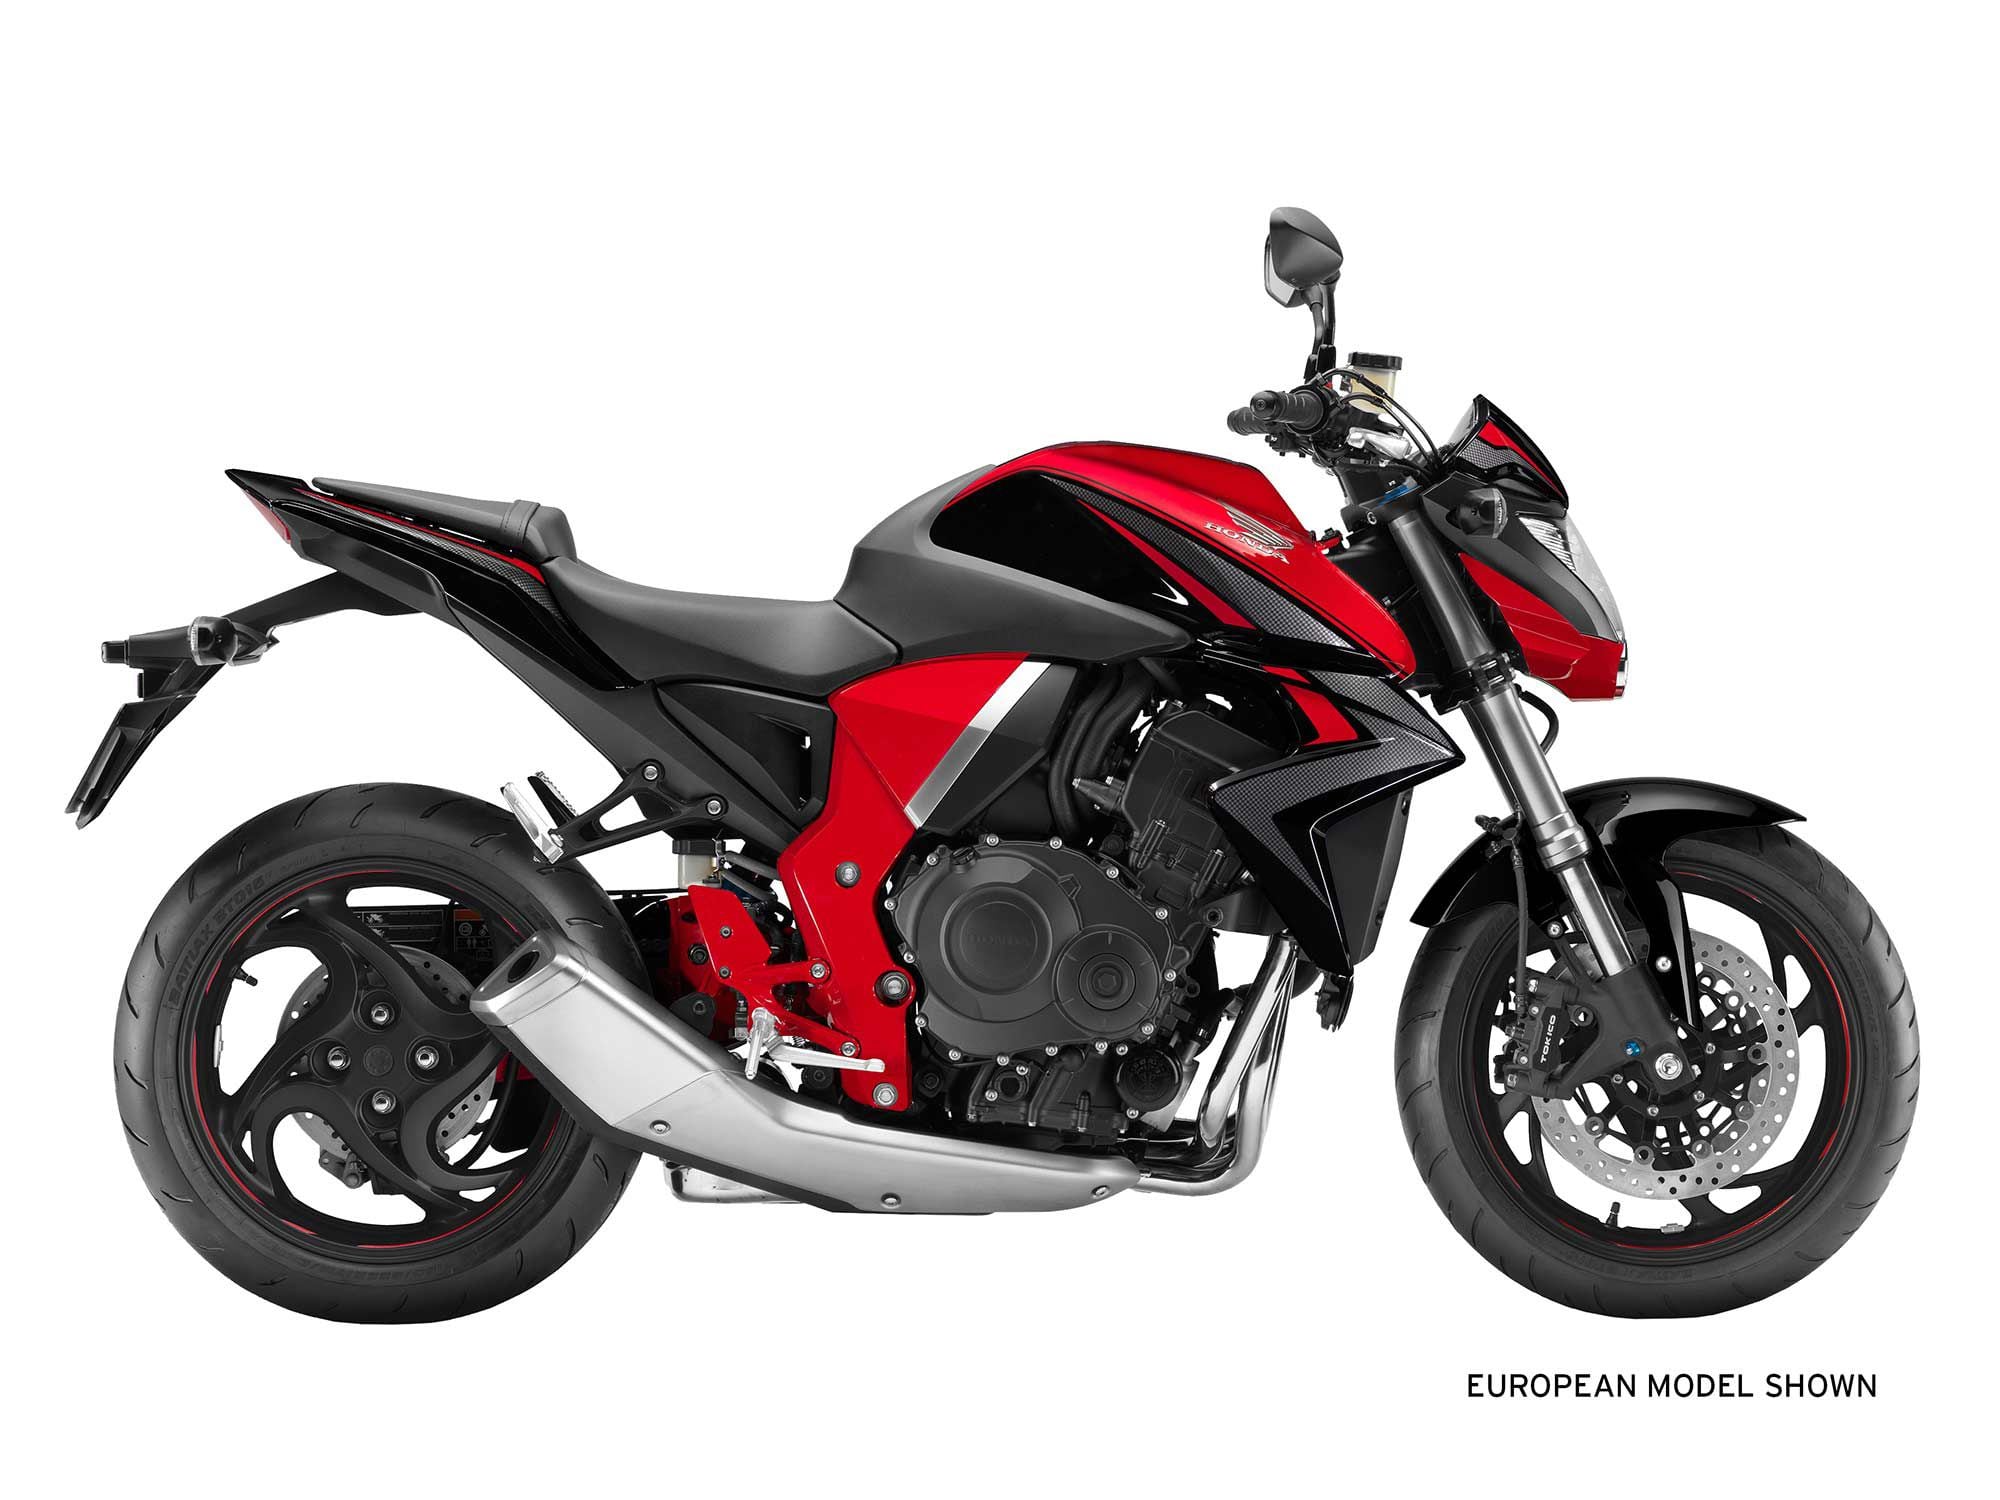 Since no other images of the 2023 CB1000R were available, here’s an official image of the 2015 Honda CB1000R.